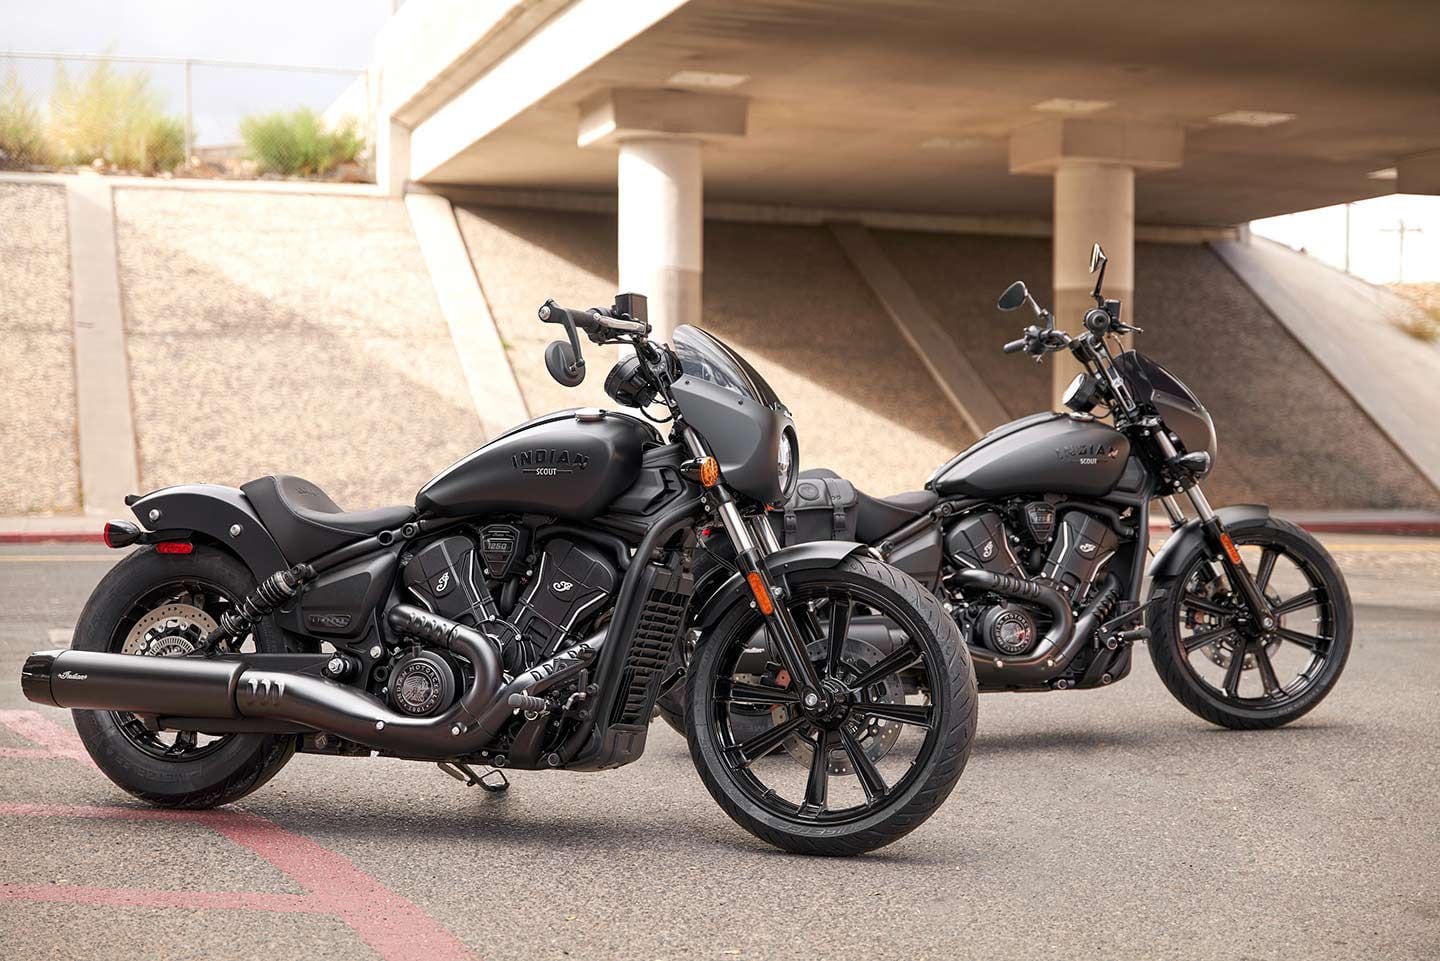 The 2025 Sport Scout goes with the same aggressive semi-club-style appearance as the departed Scout Rogue, with a murdered-out look, high bars, and a slick quarter fairing.